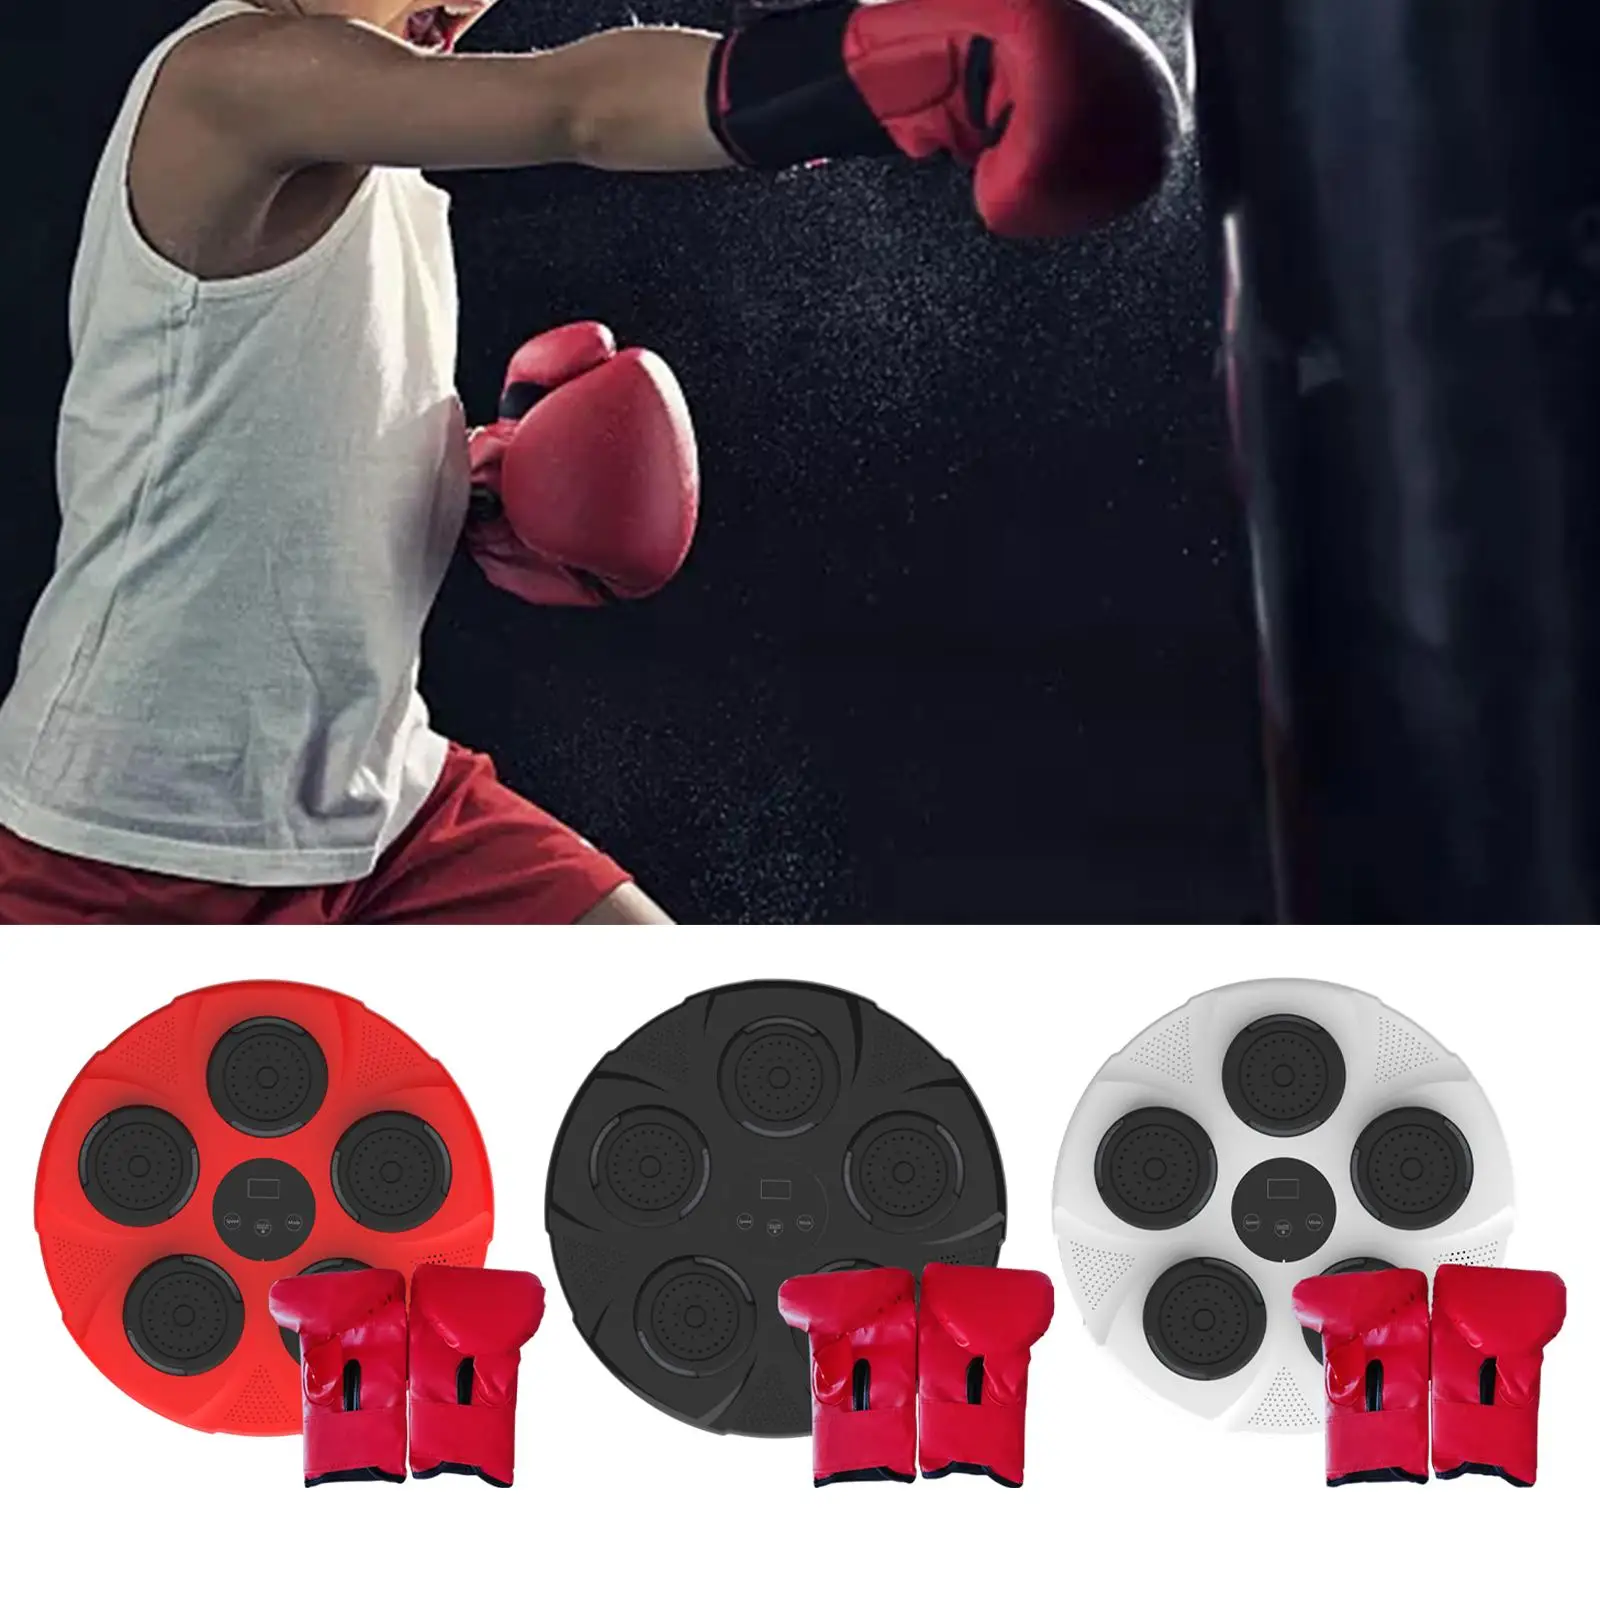 Music Boxing Machine Equipment Adults RGB Light for Practice Home Kickboxing